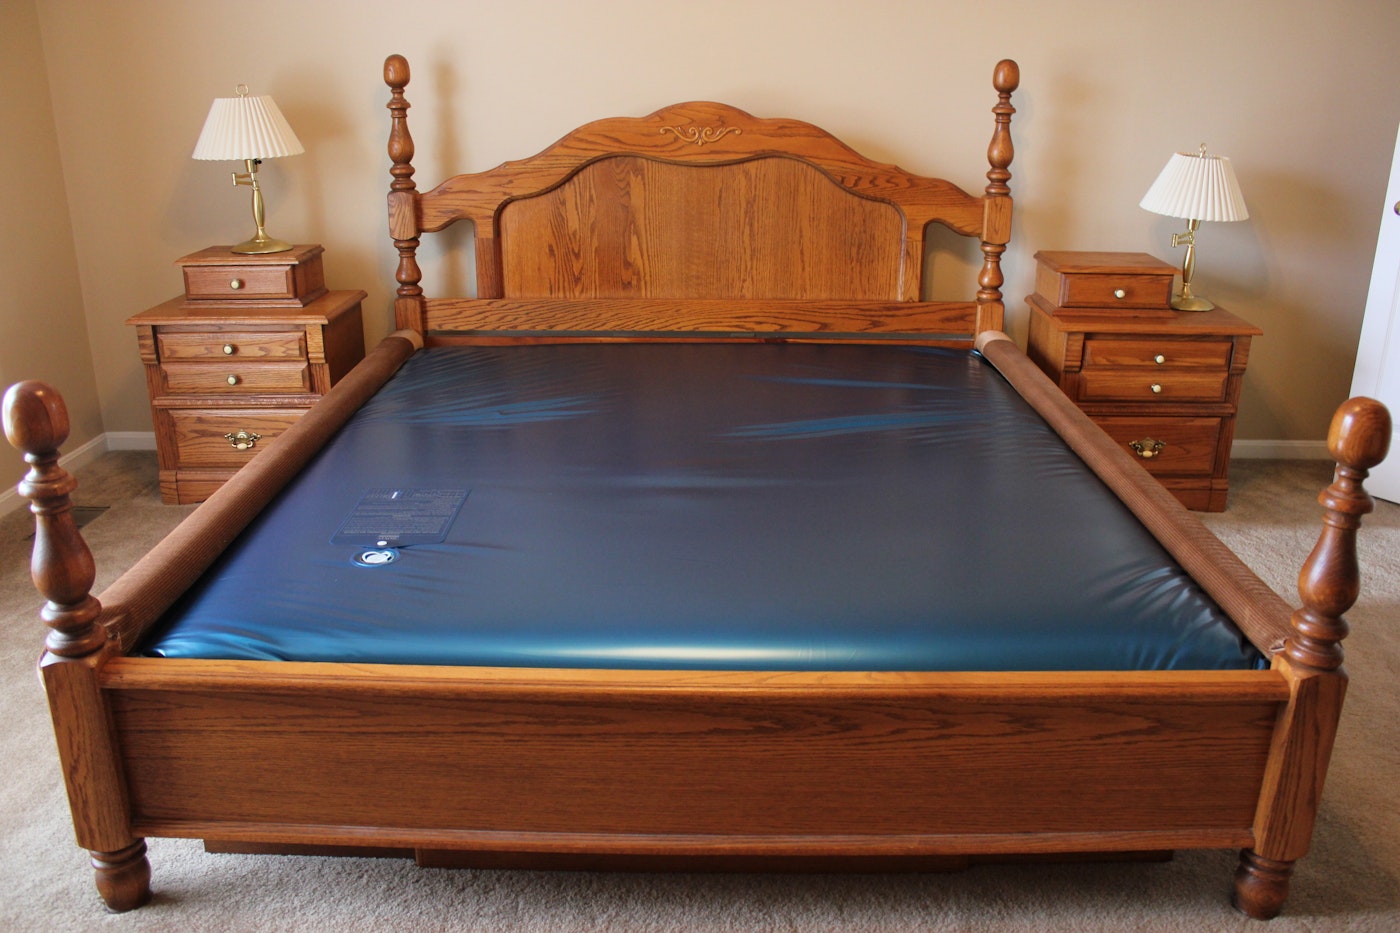 water bed mattress for sale